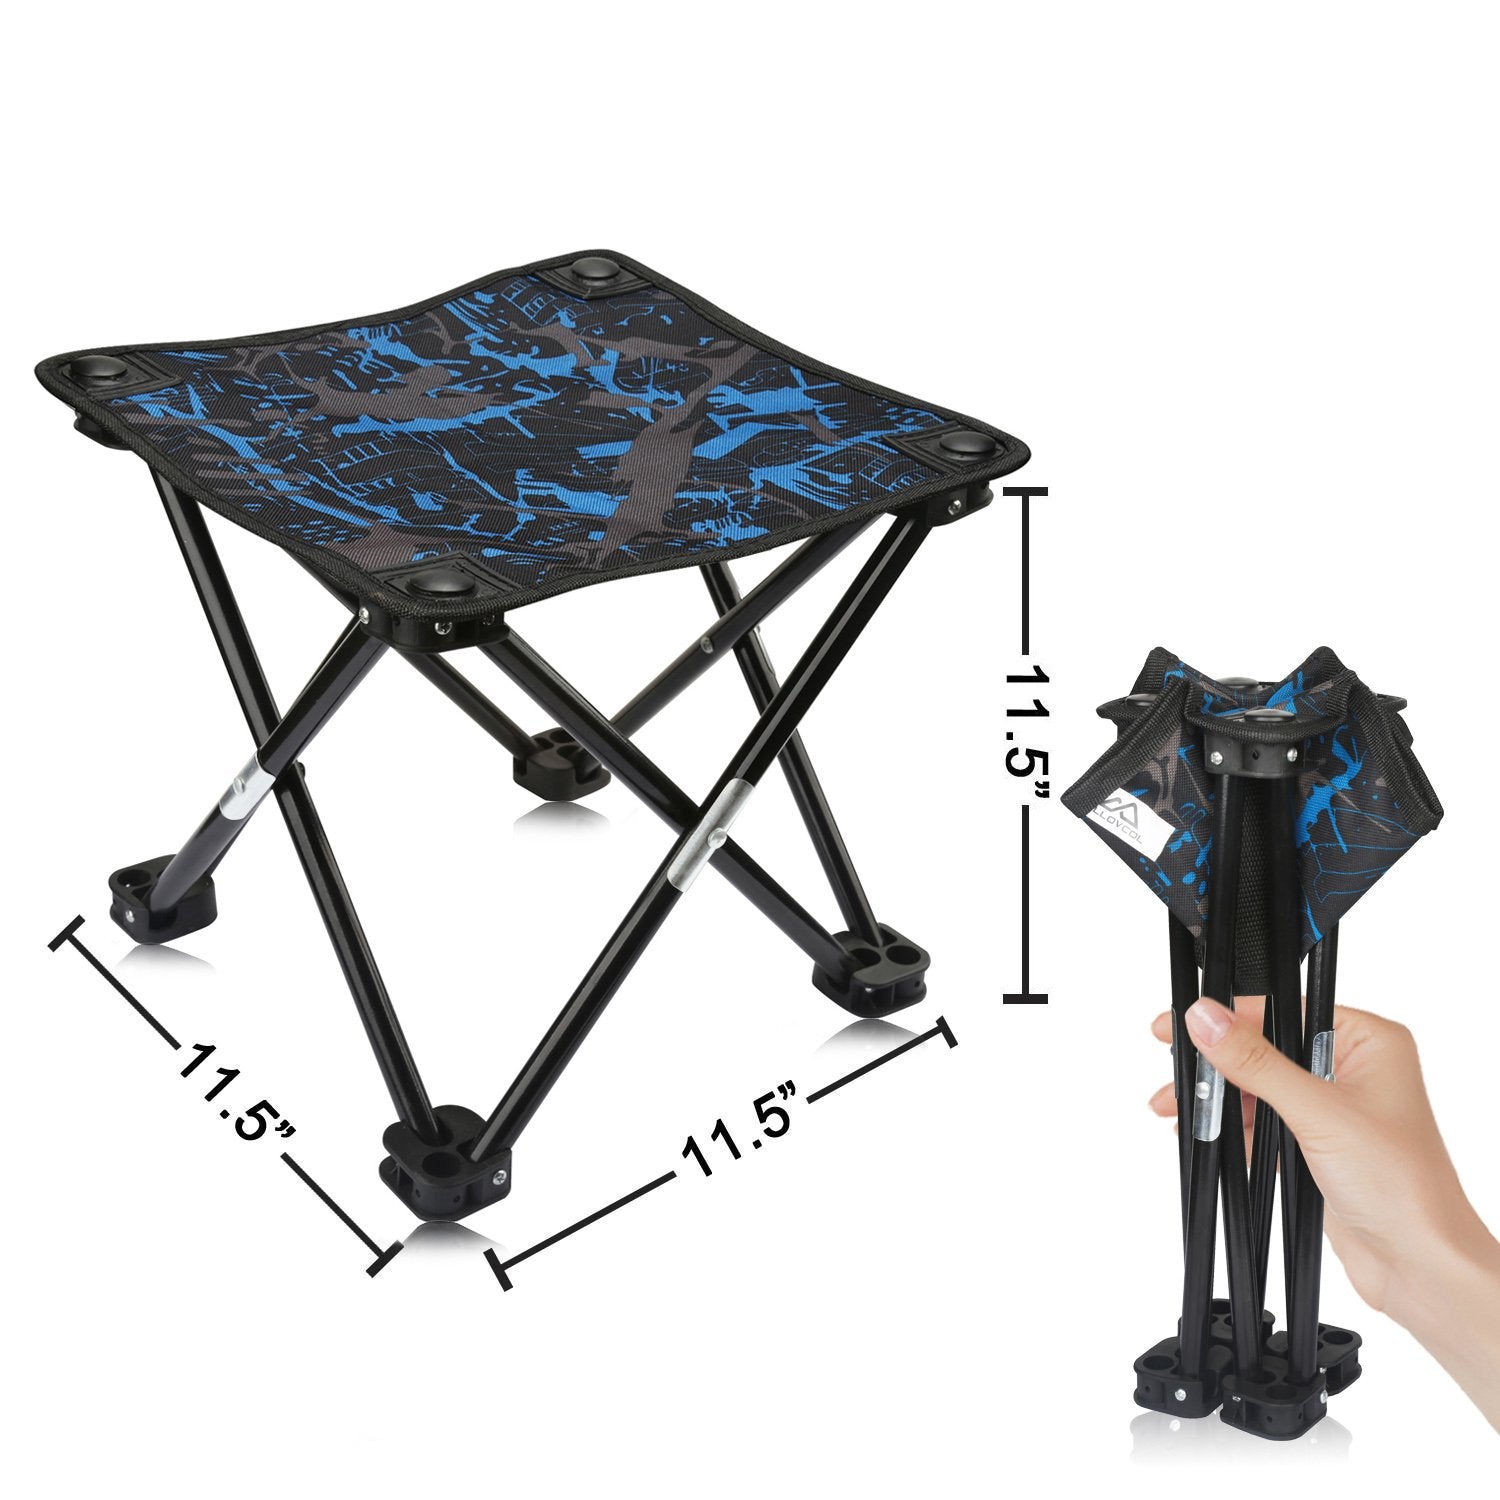 AILLOVCOL Camping Stool Portable Folding Stool Portable Chair Mini Foldable Stool Fishing Stool for Adults Fishing Hiking Gardening and Beach with Carry Bag(Camouflage) (Blue)